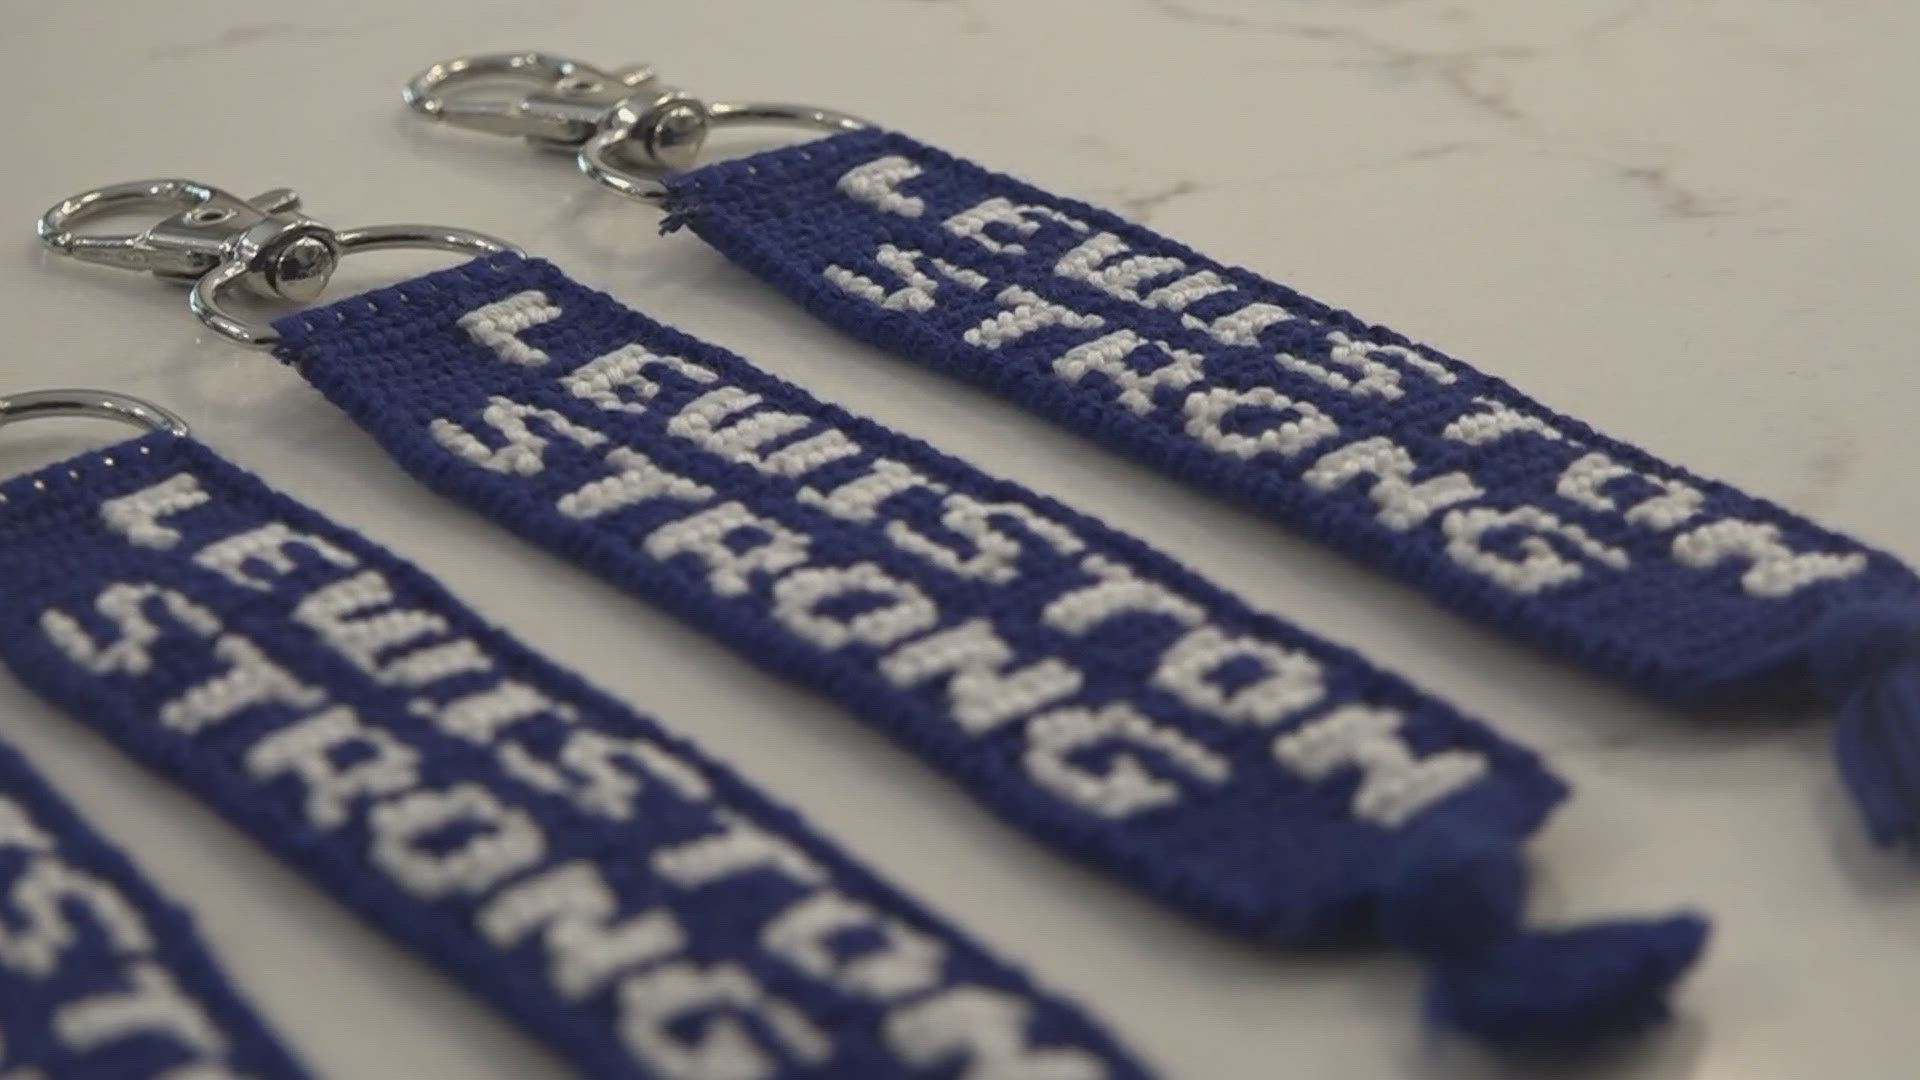 Tillie Reis said she's aiming to raise $1,000 by selling 50 keychains.